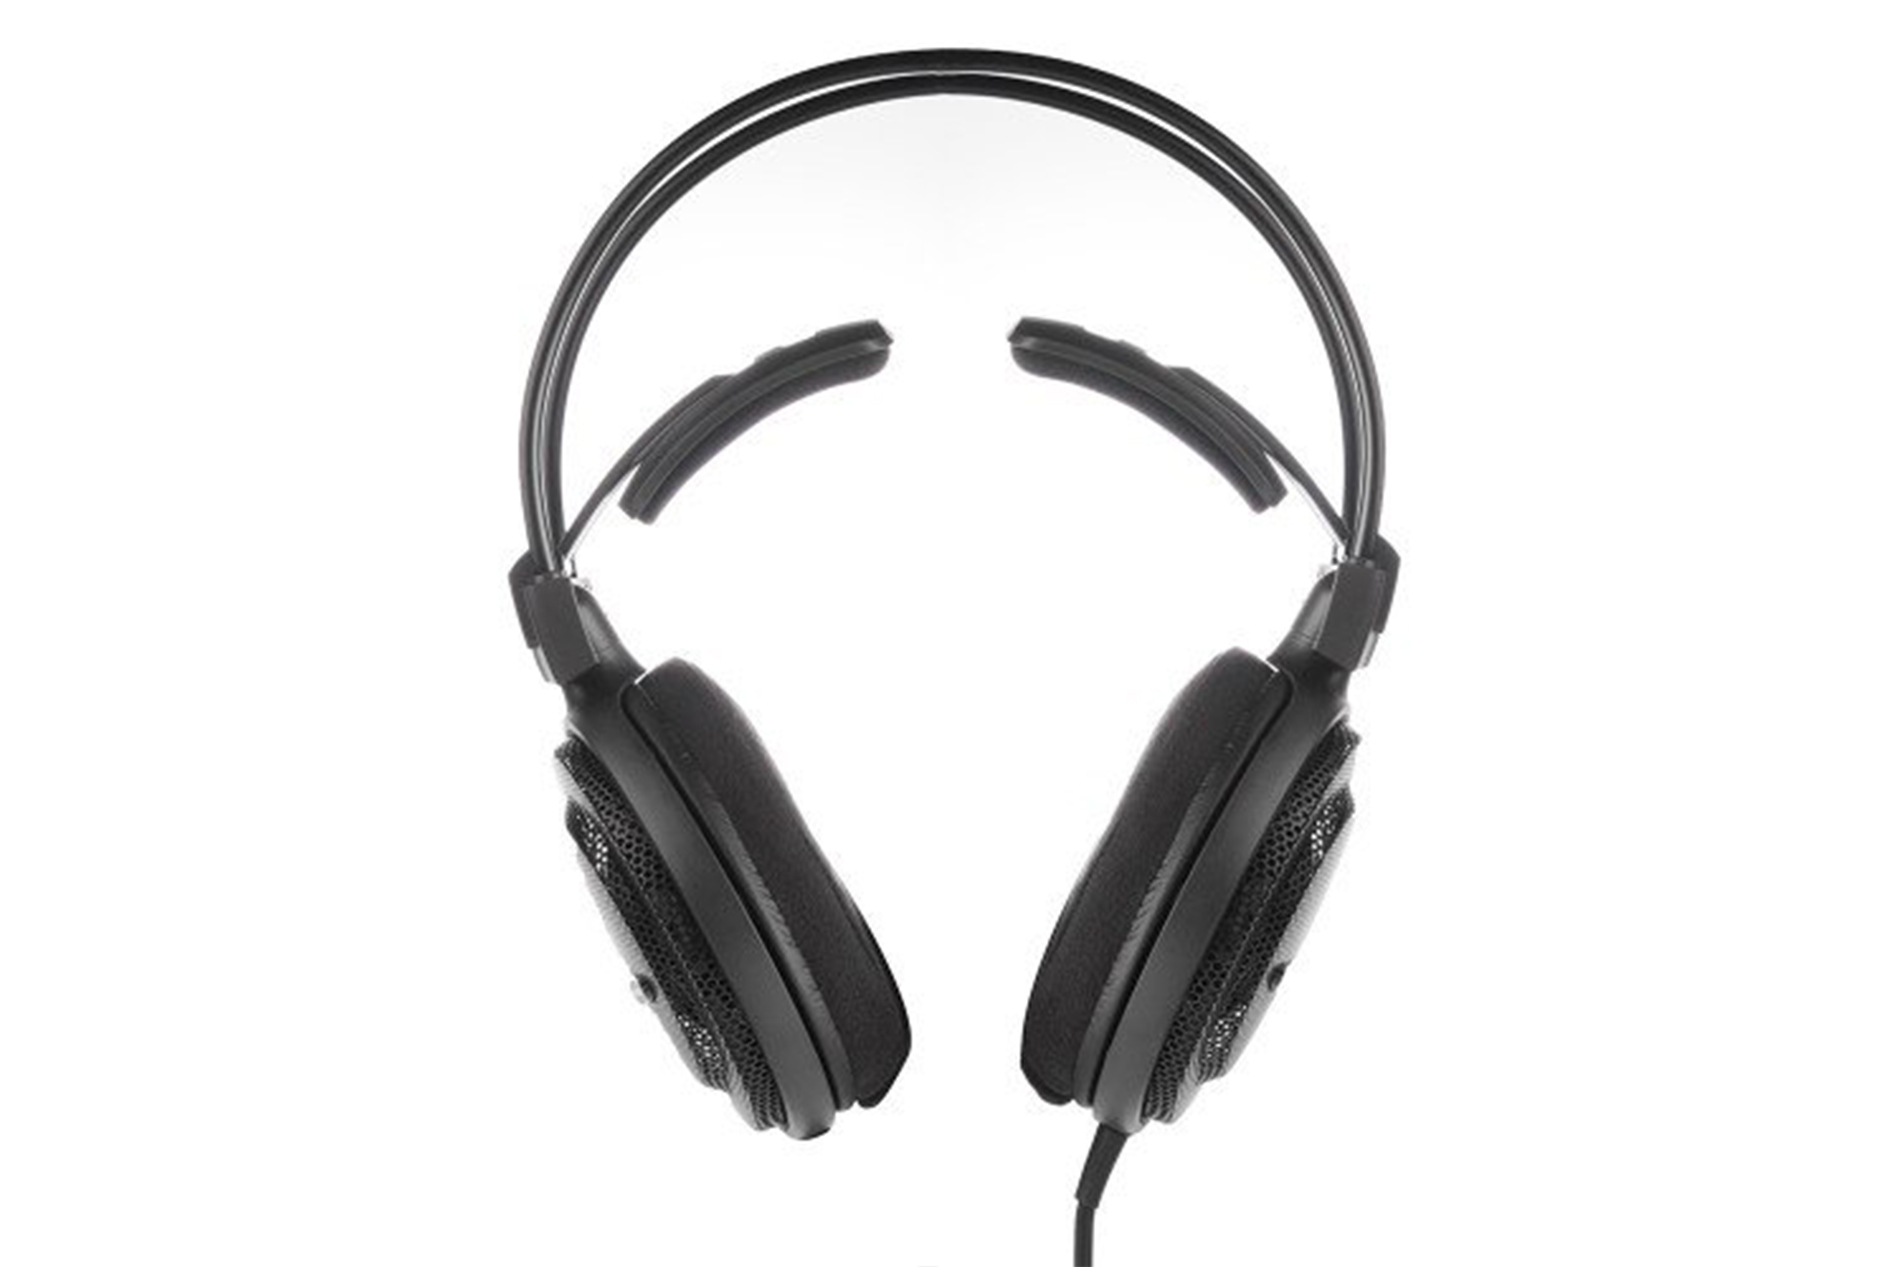 Audio-Technica -AD900x headphones straight-on product image against white background.